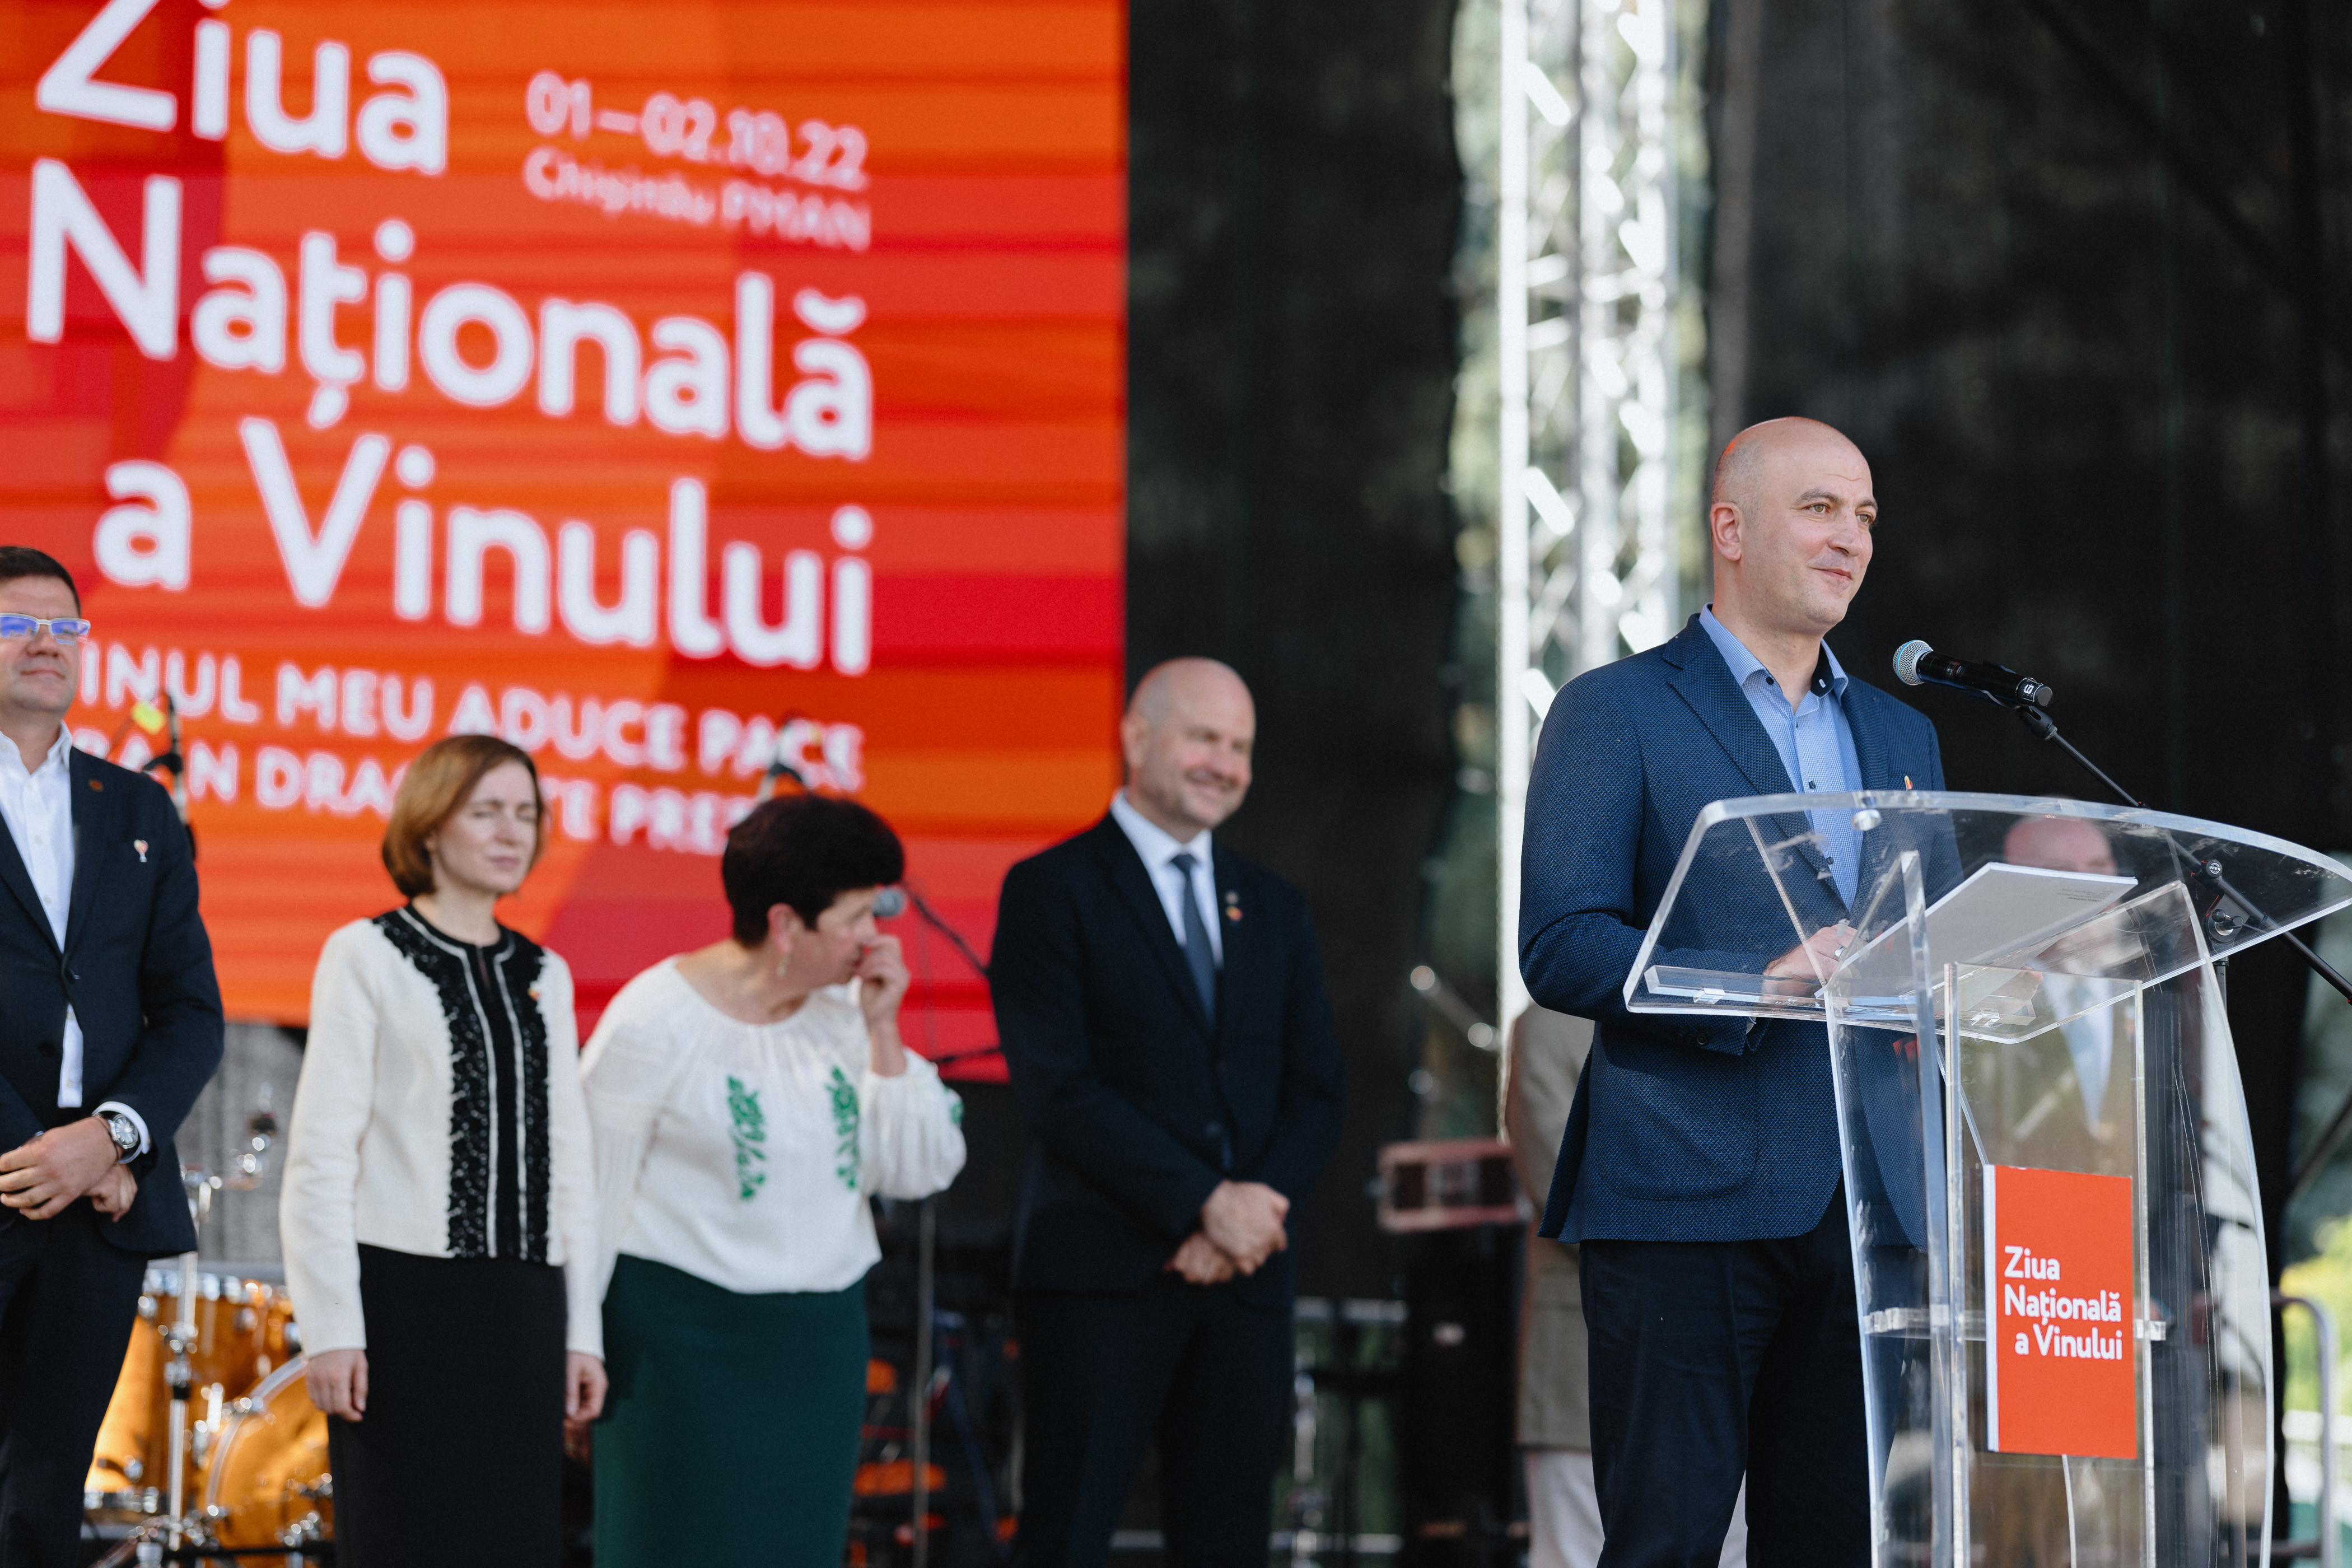 Giorgi Shagidze, Chairman of maib, at the opening ceremony of the National Wine Day